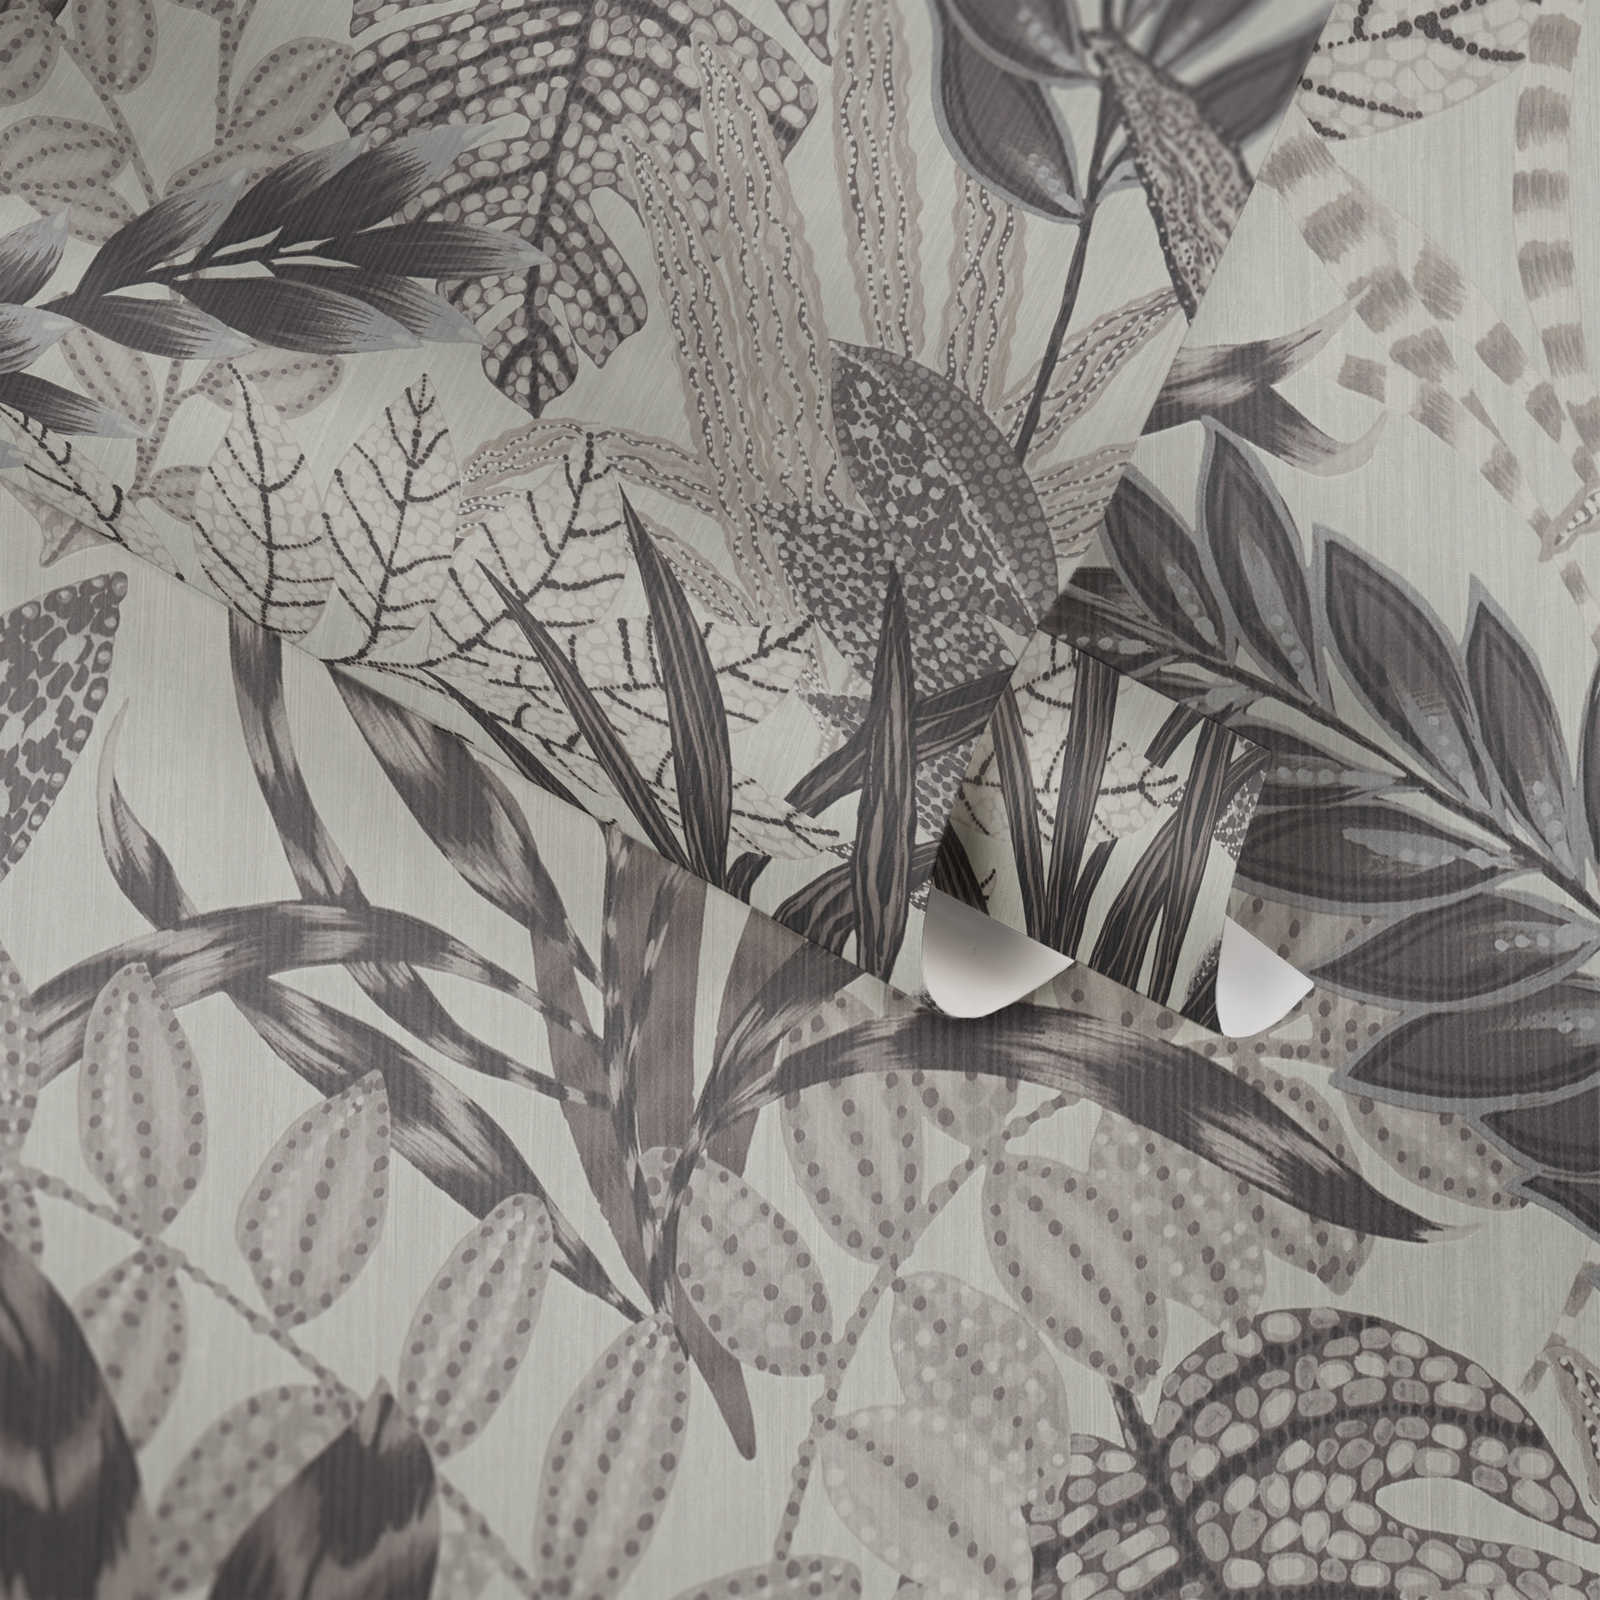             Monochrome jungle wallpaper with embossed texture - grey, white
        